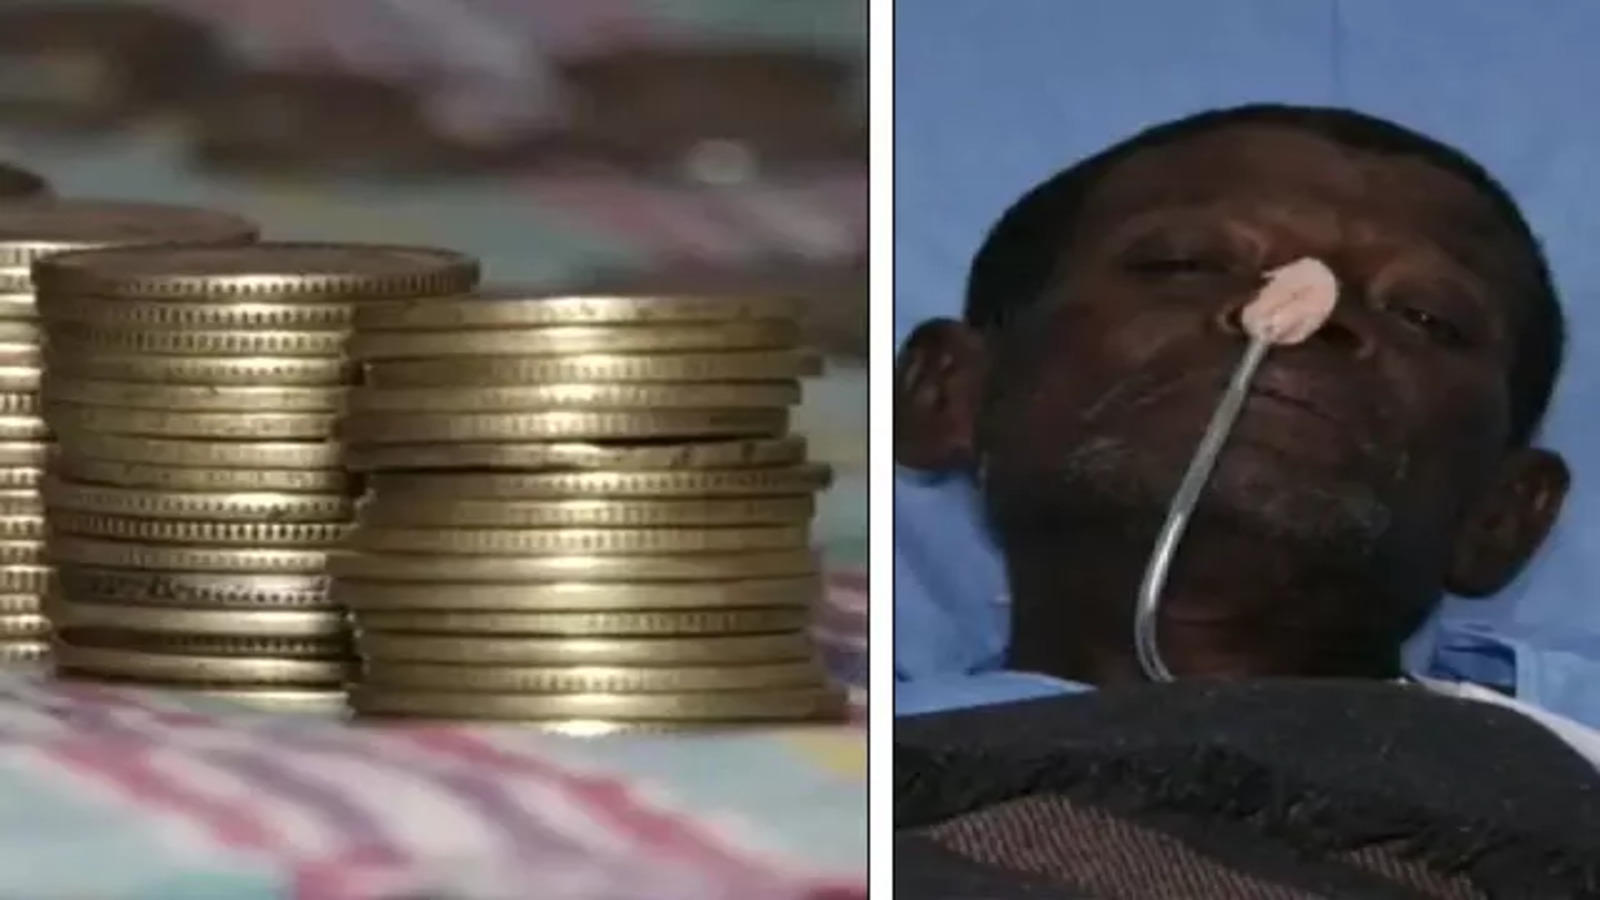 187 coins removed from man’s stomach in Bagalkot